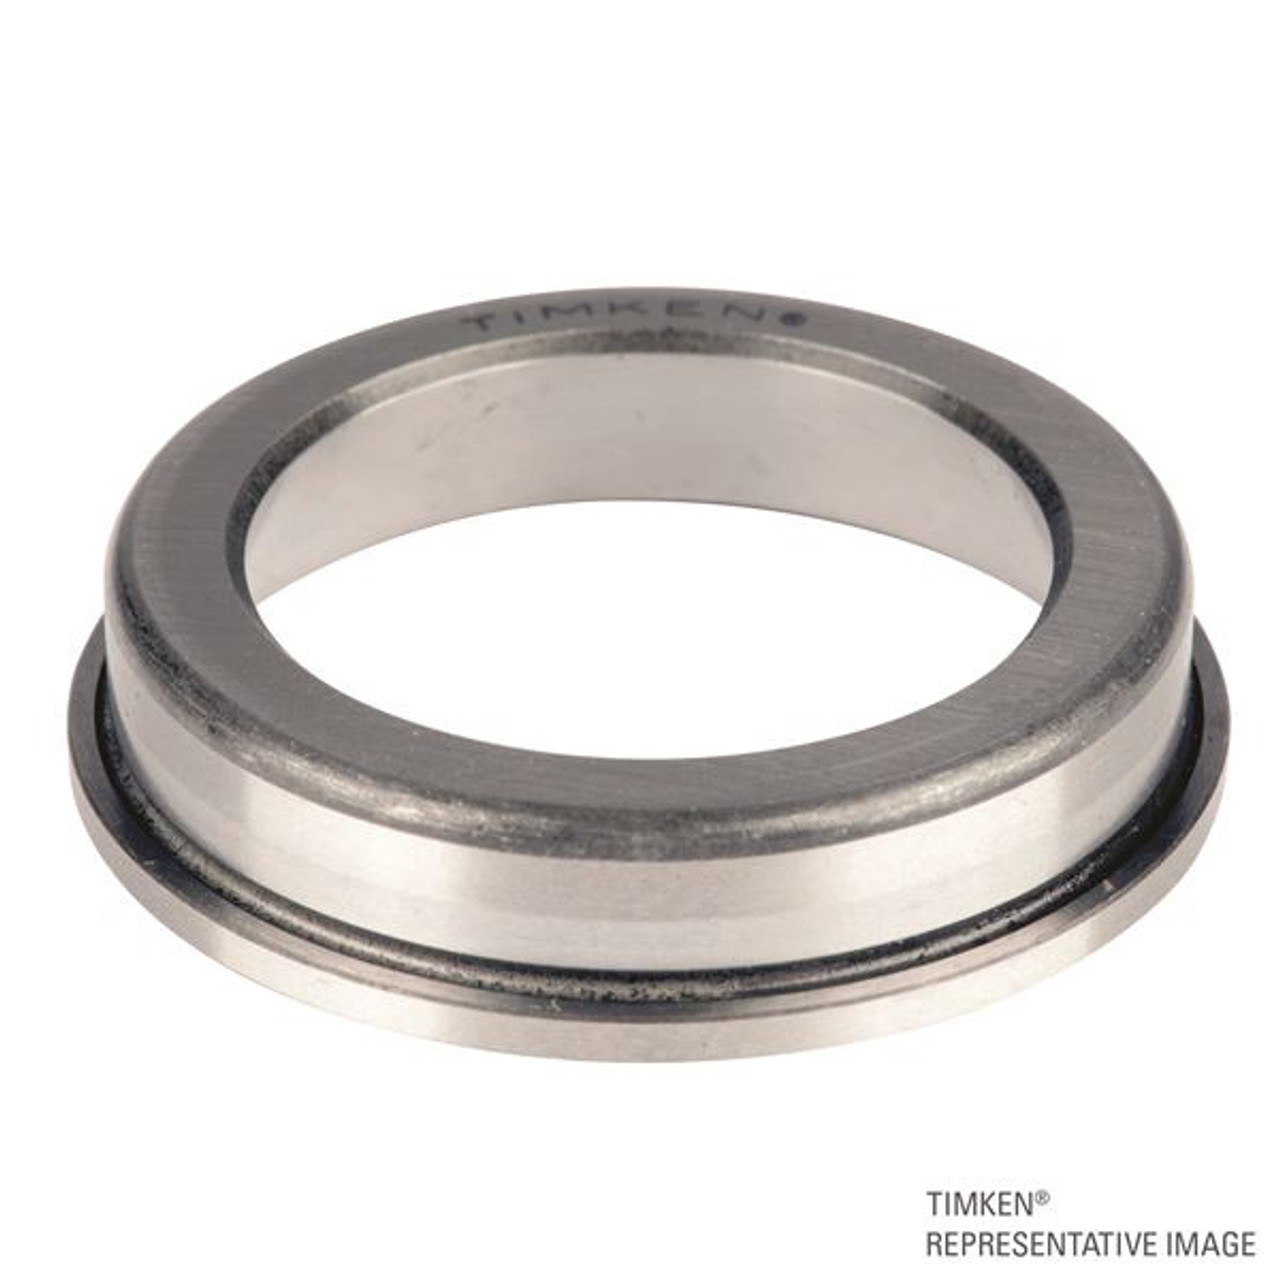 Timken® Single Row Flanged Cup - Precision Class  232000B-3